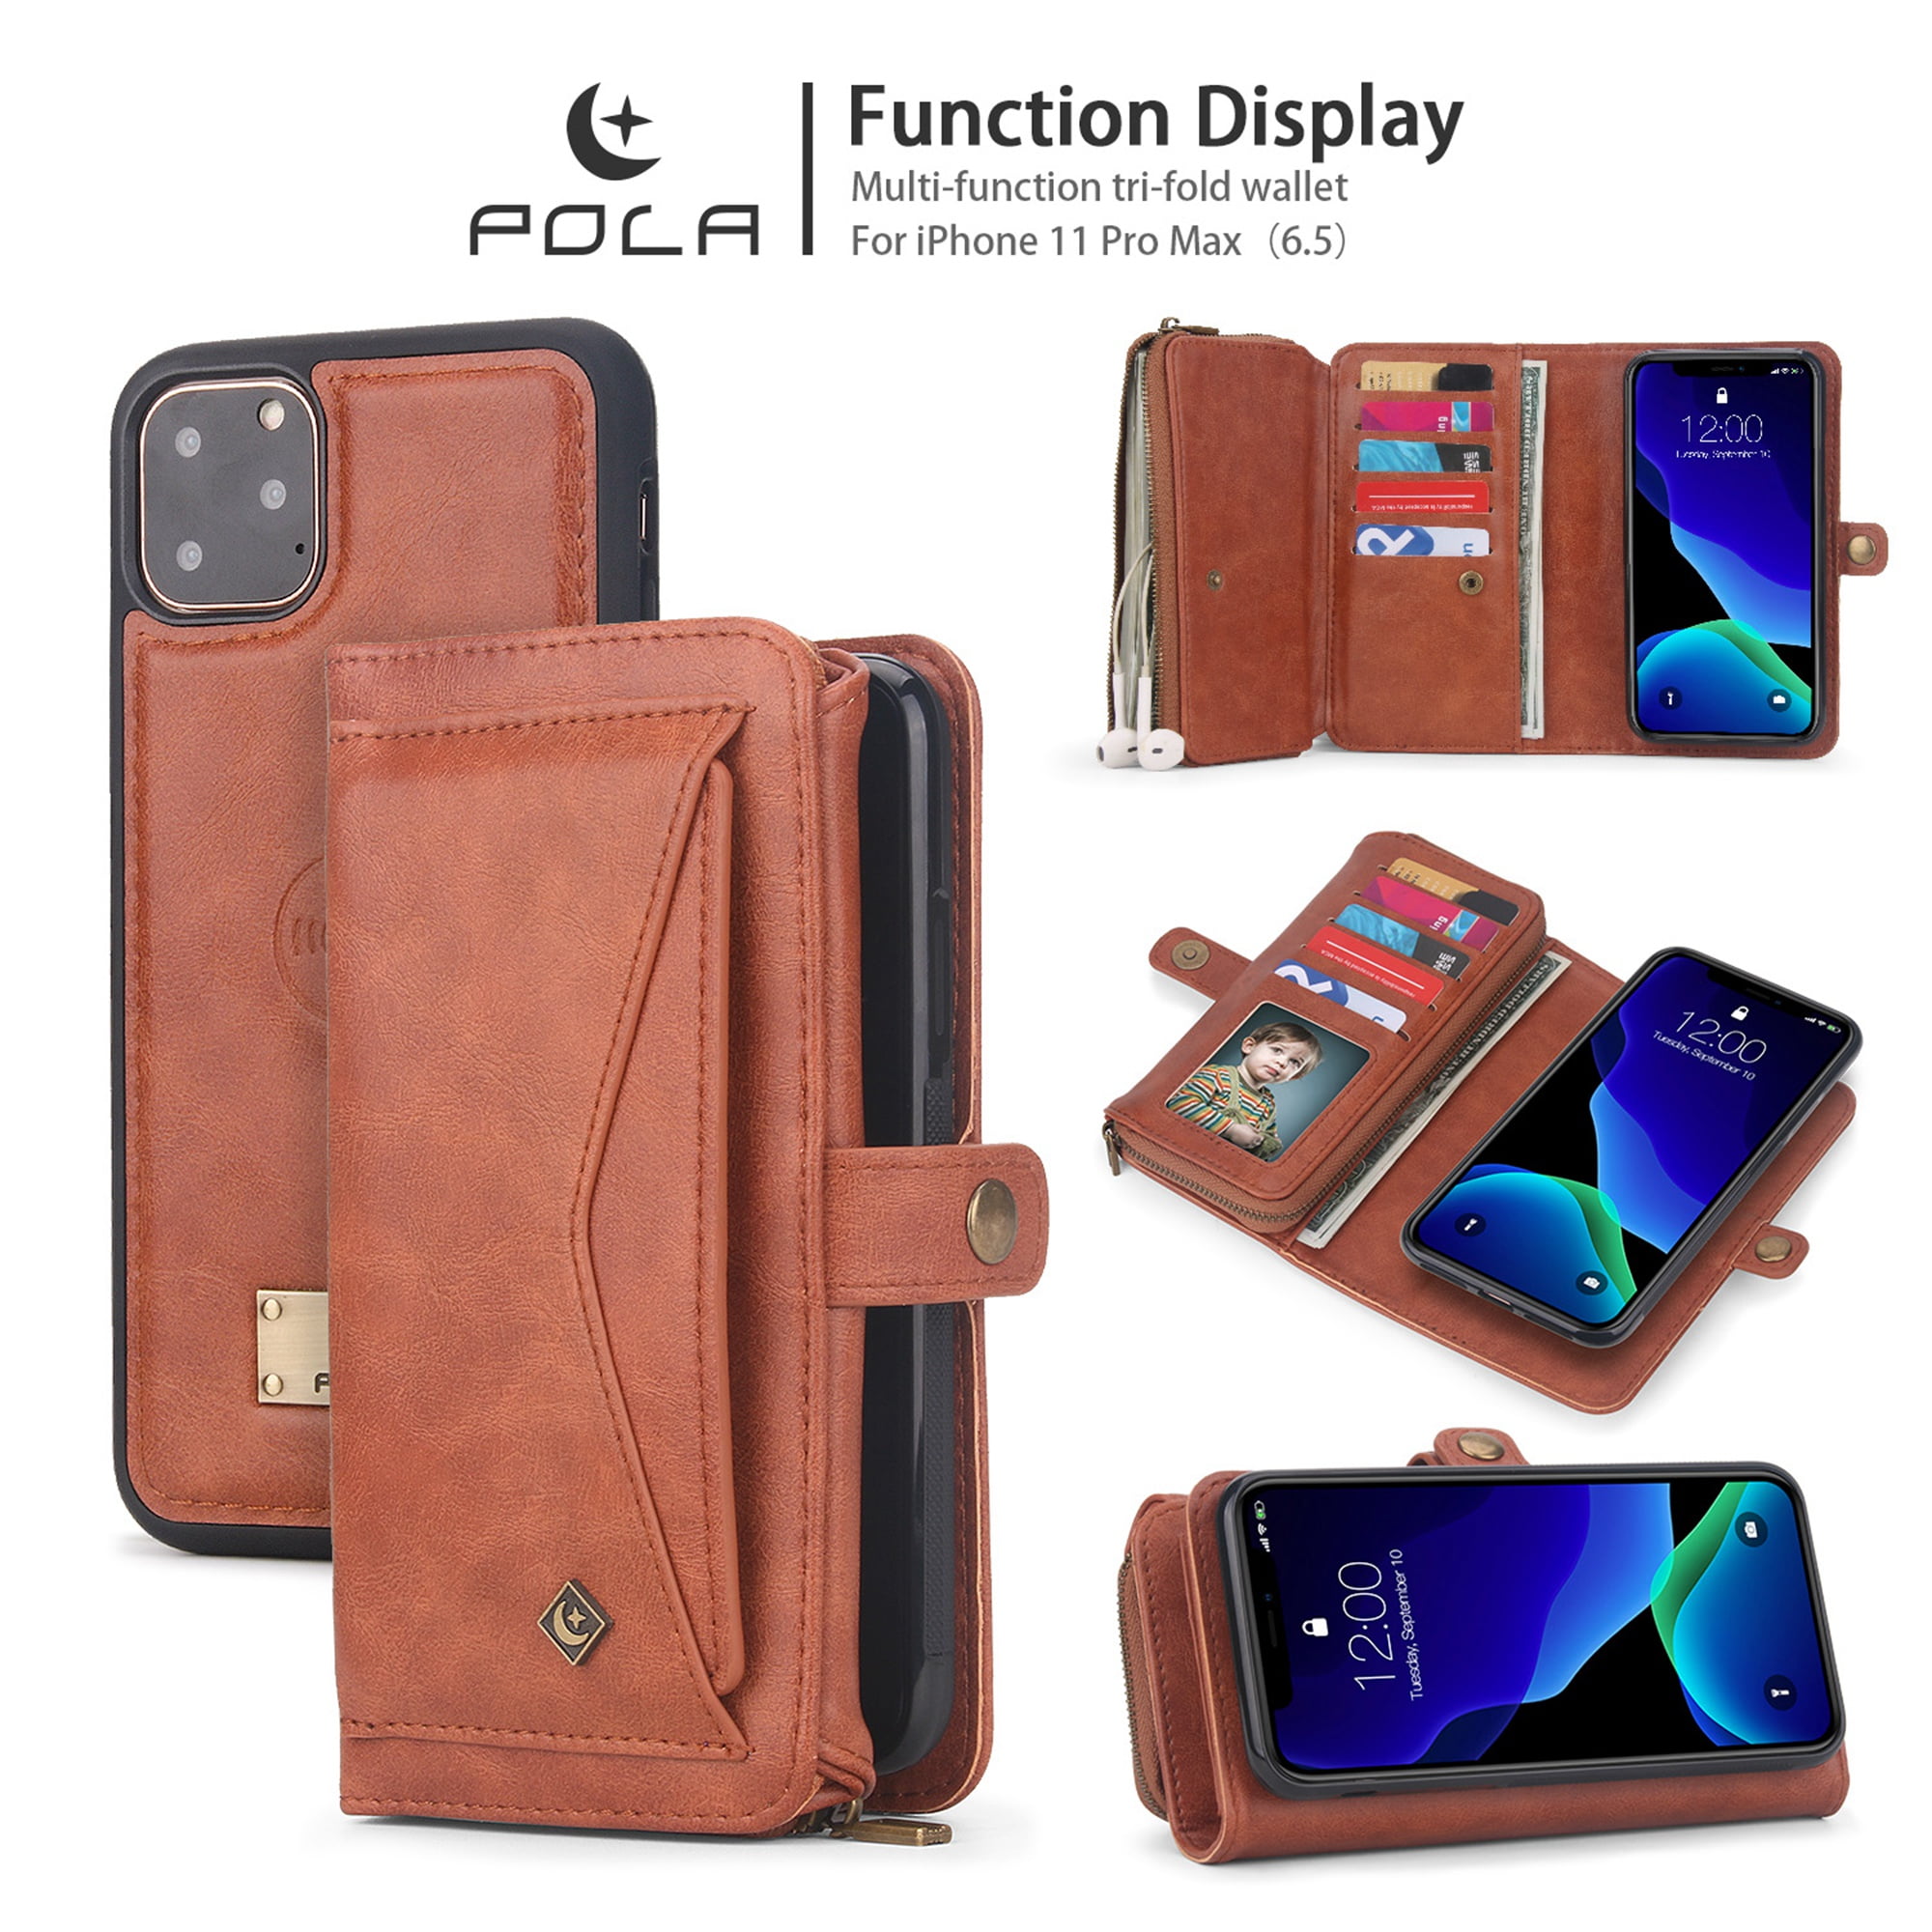 iPhone 11Pro Max 6.5 inch Wallet Case, Dteck 2 in 1 Leather Zipper Purse Multi-Function Tri-fold ...